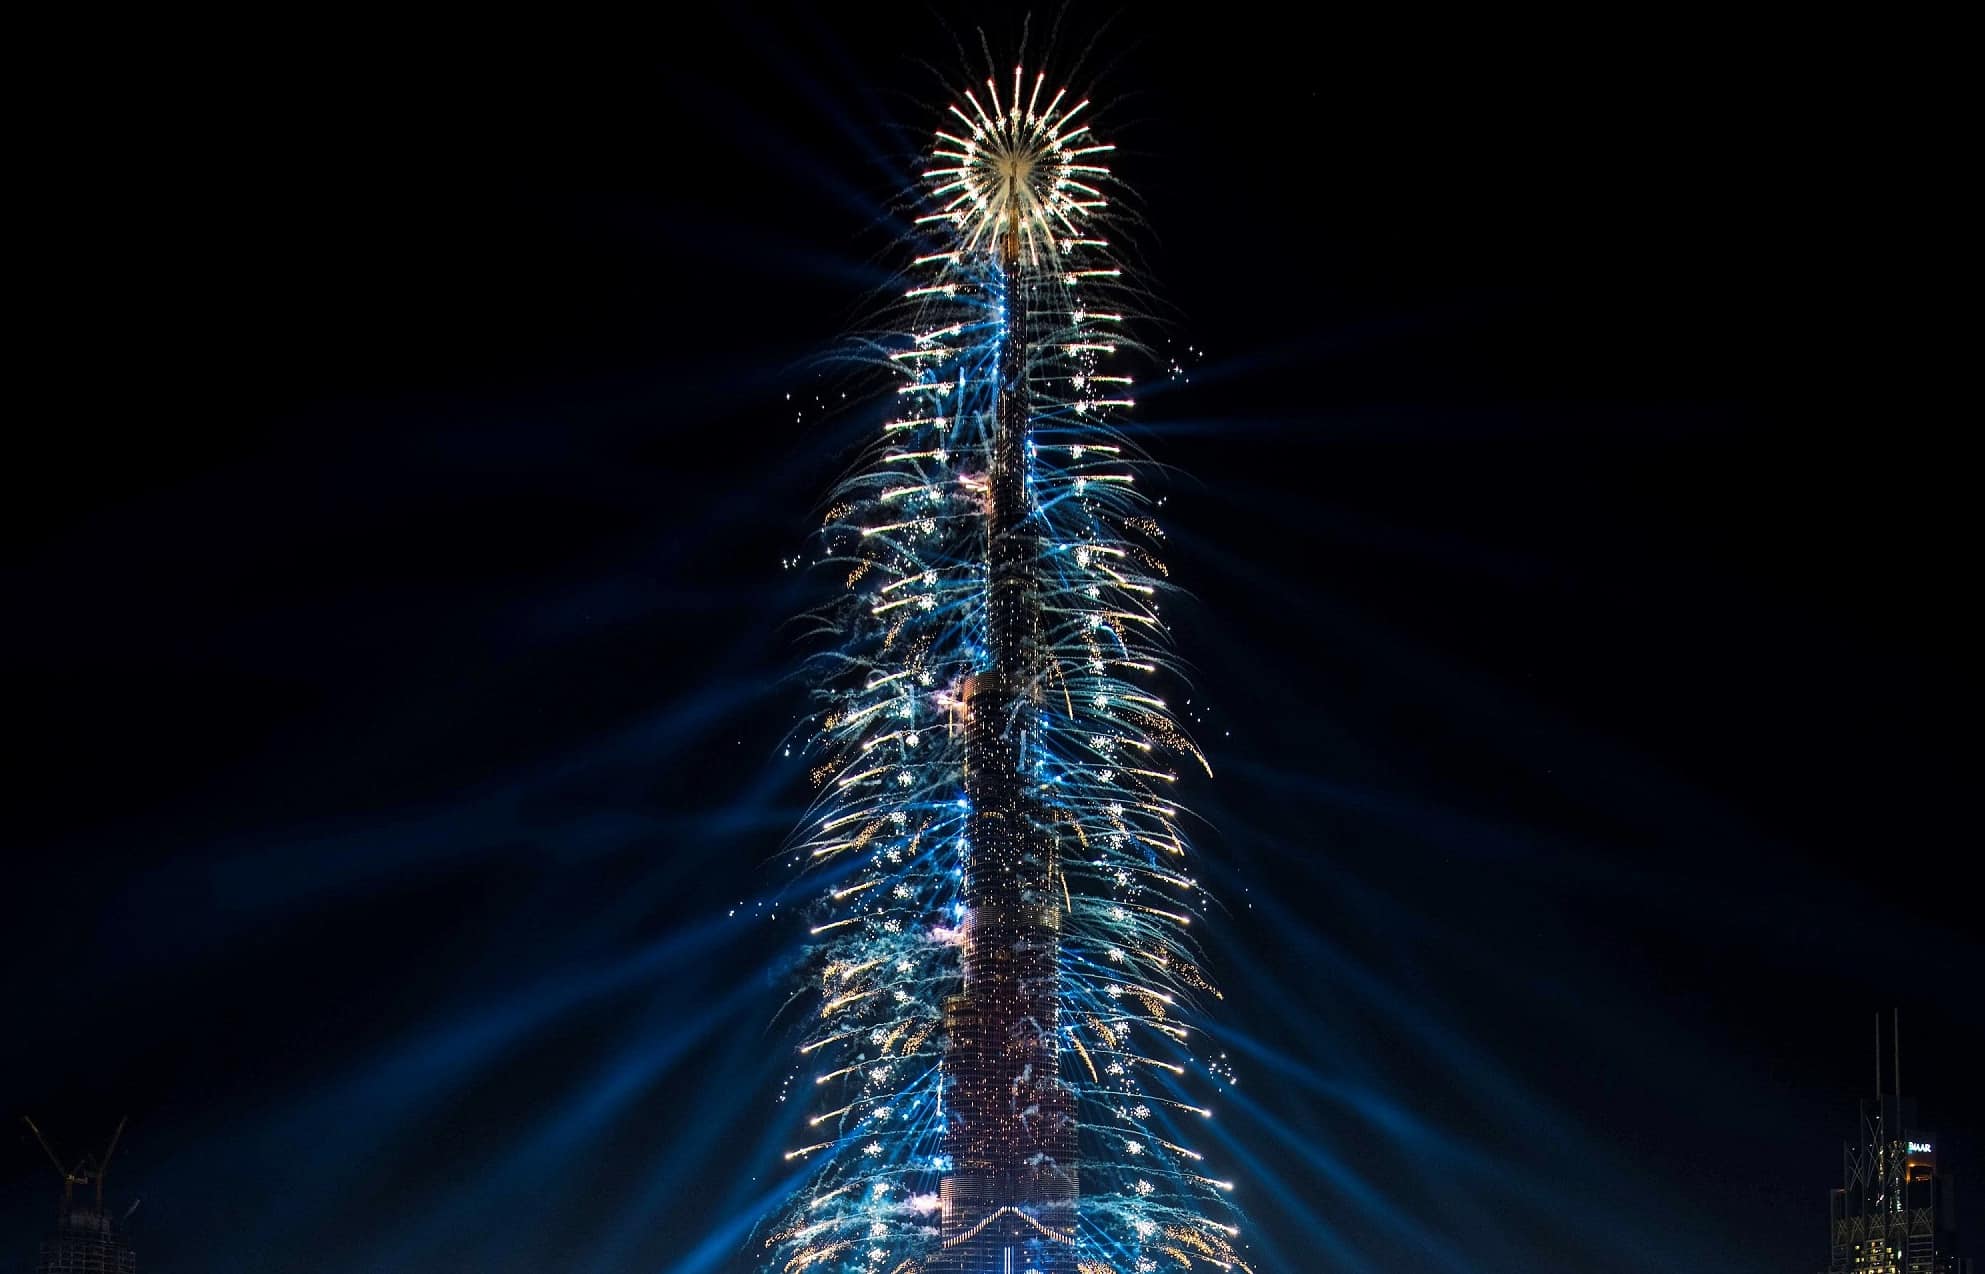 Zoom and EMAAR collaborate to host a spectacular new year's eve celebration